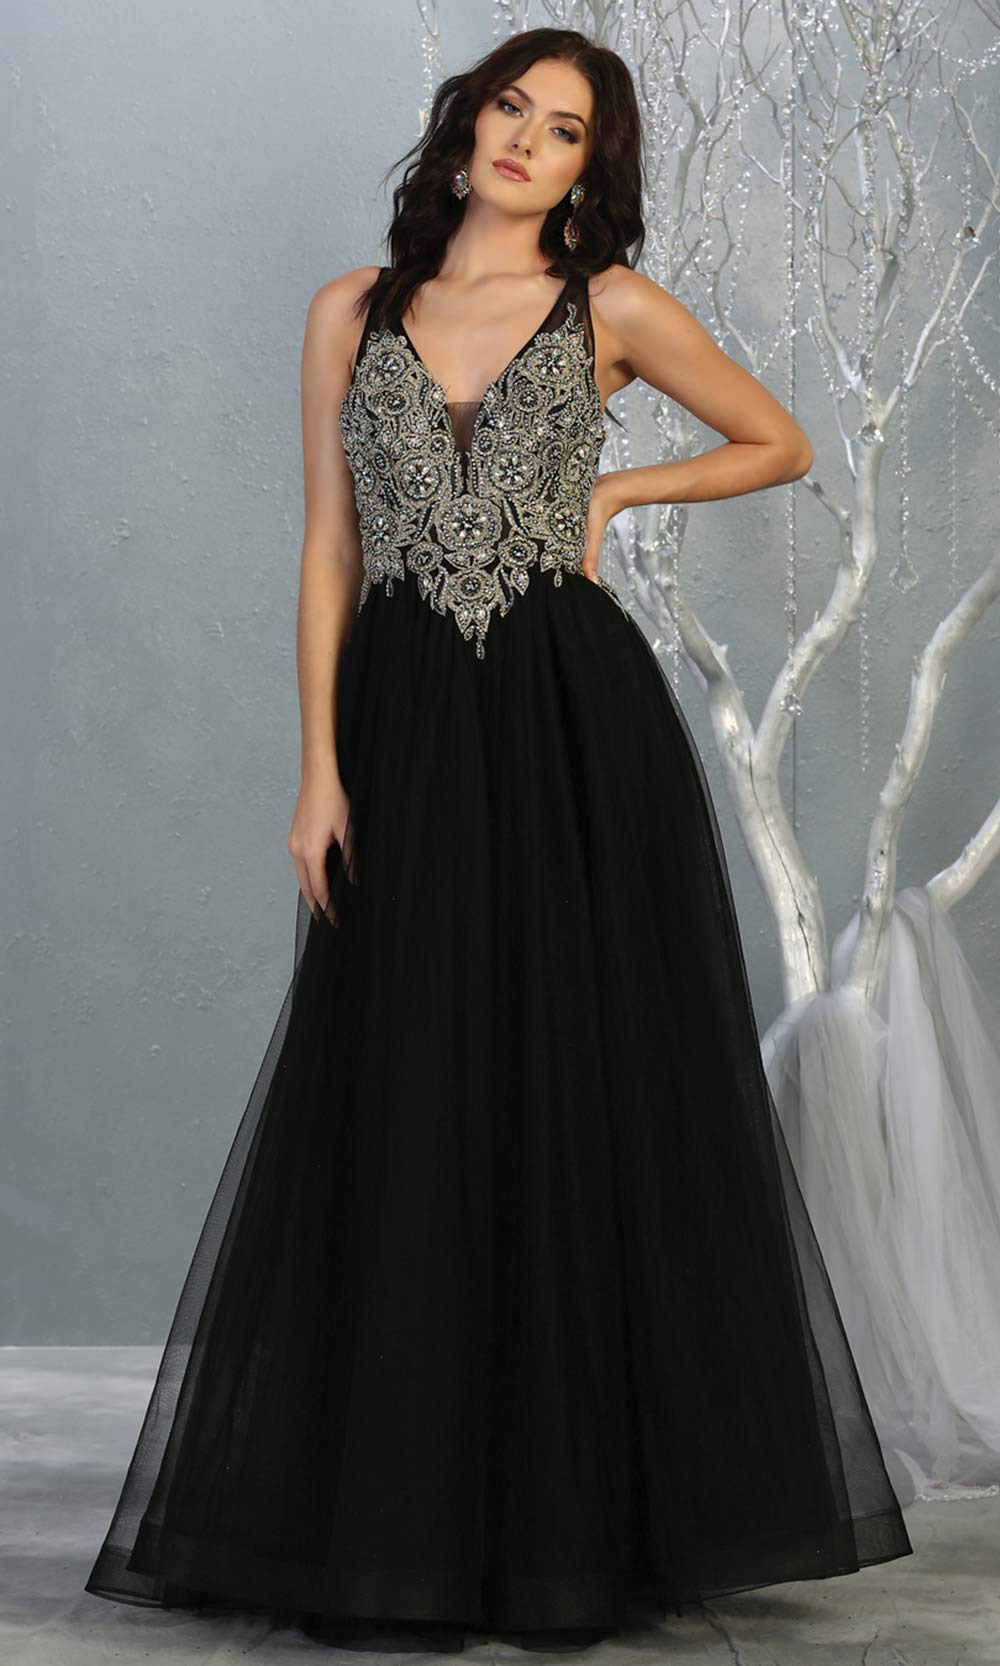 Mayqueen MQ 1737 long black v neck beaded top evening dress w/low back & flowy tulle skirt. Full length black gown is perfect for enagagement/e-shoot dress, wedding reception dress, indowestern gown, formal evening party dress, prom. Plus sizes avail.jpg